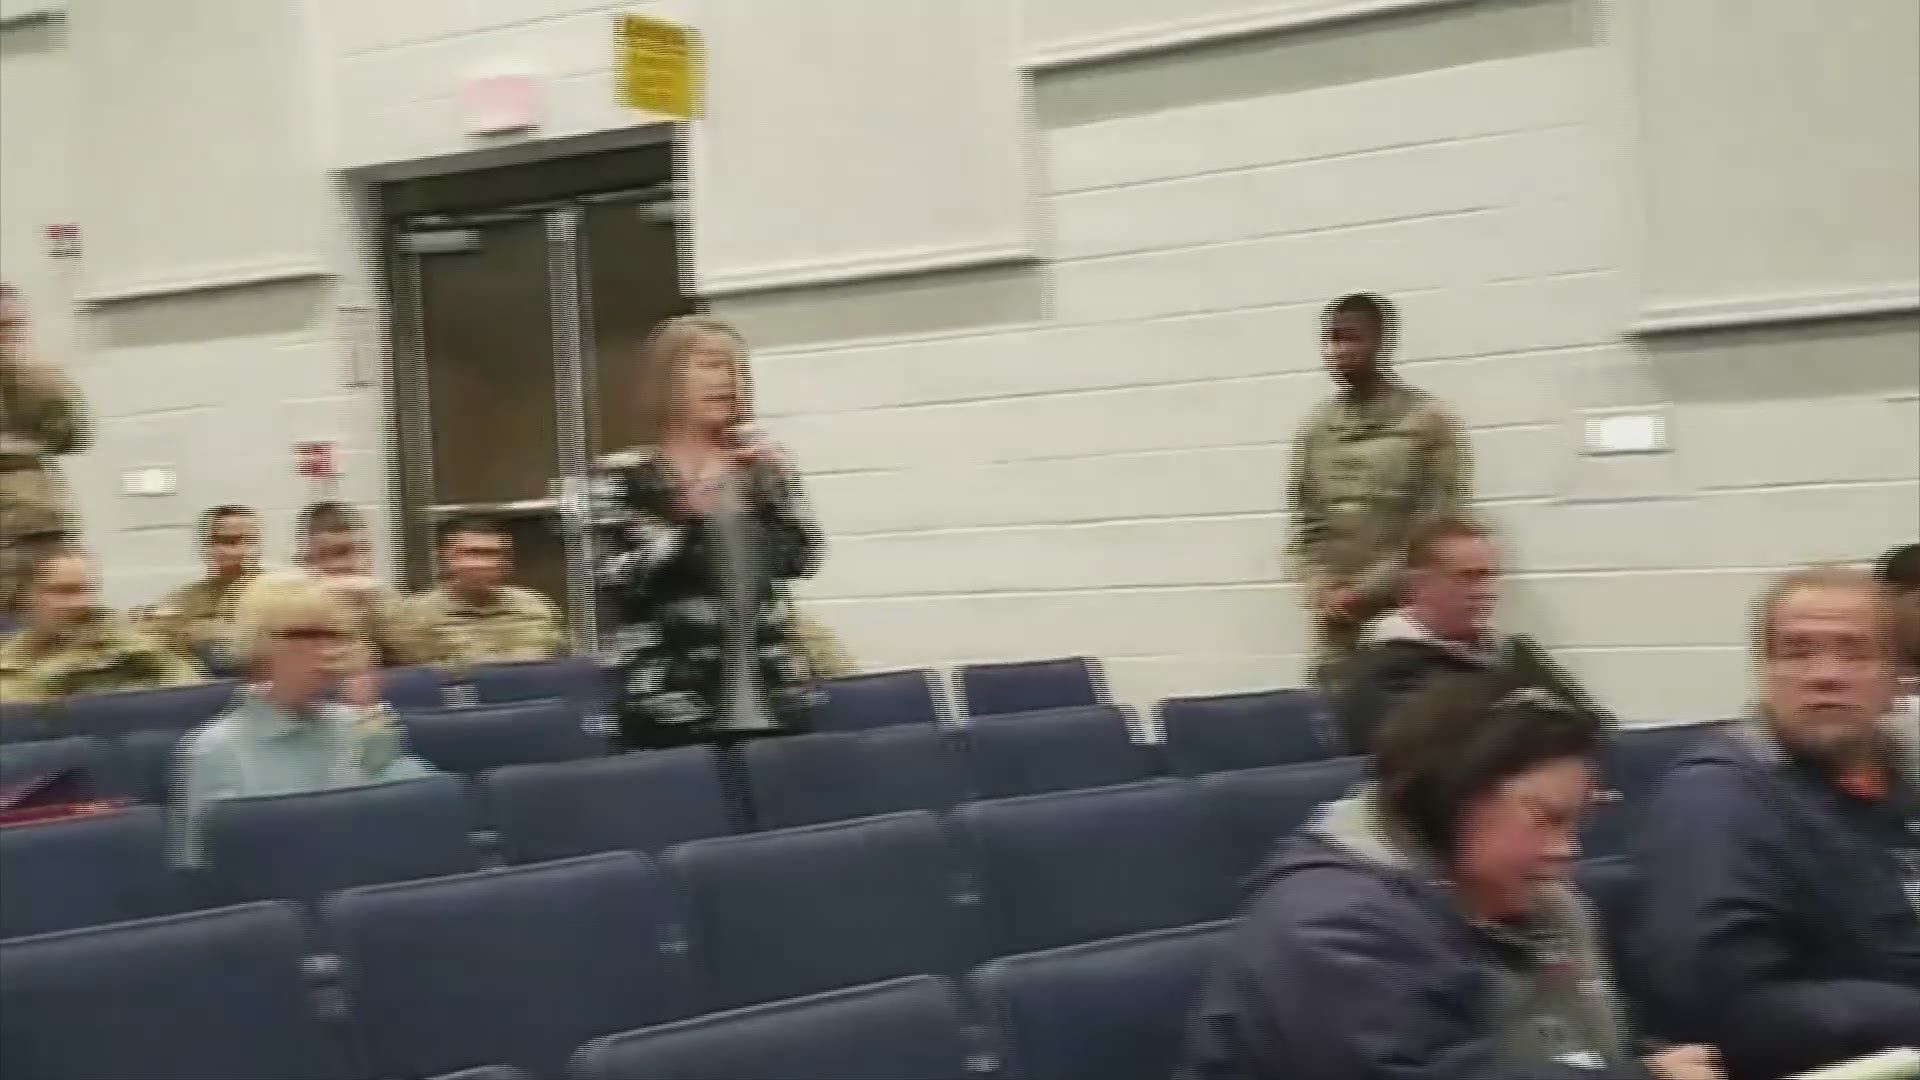 Town-hall meetings this week have revealed the poor state of housing conditions for Fort Hood soldiers and their families, who complained about mold issues, lead paint and roach infestations.